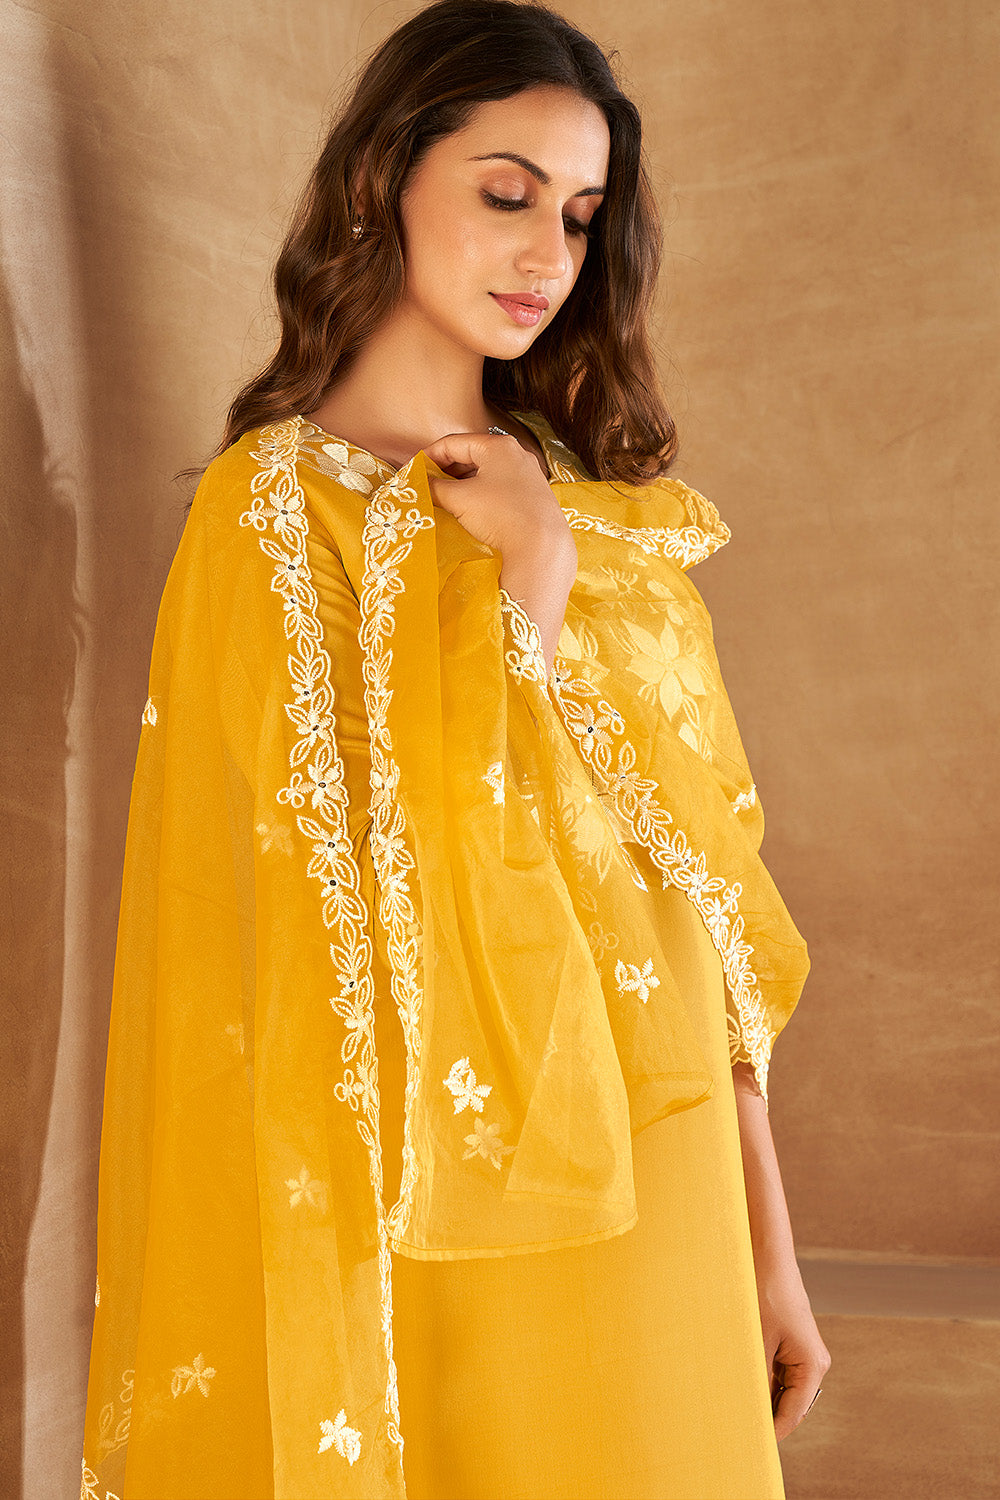 Mustard Color Muslin Resham Embroidered Suit